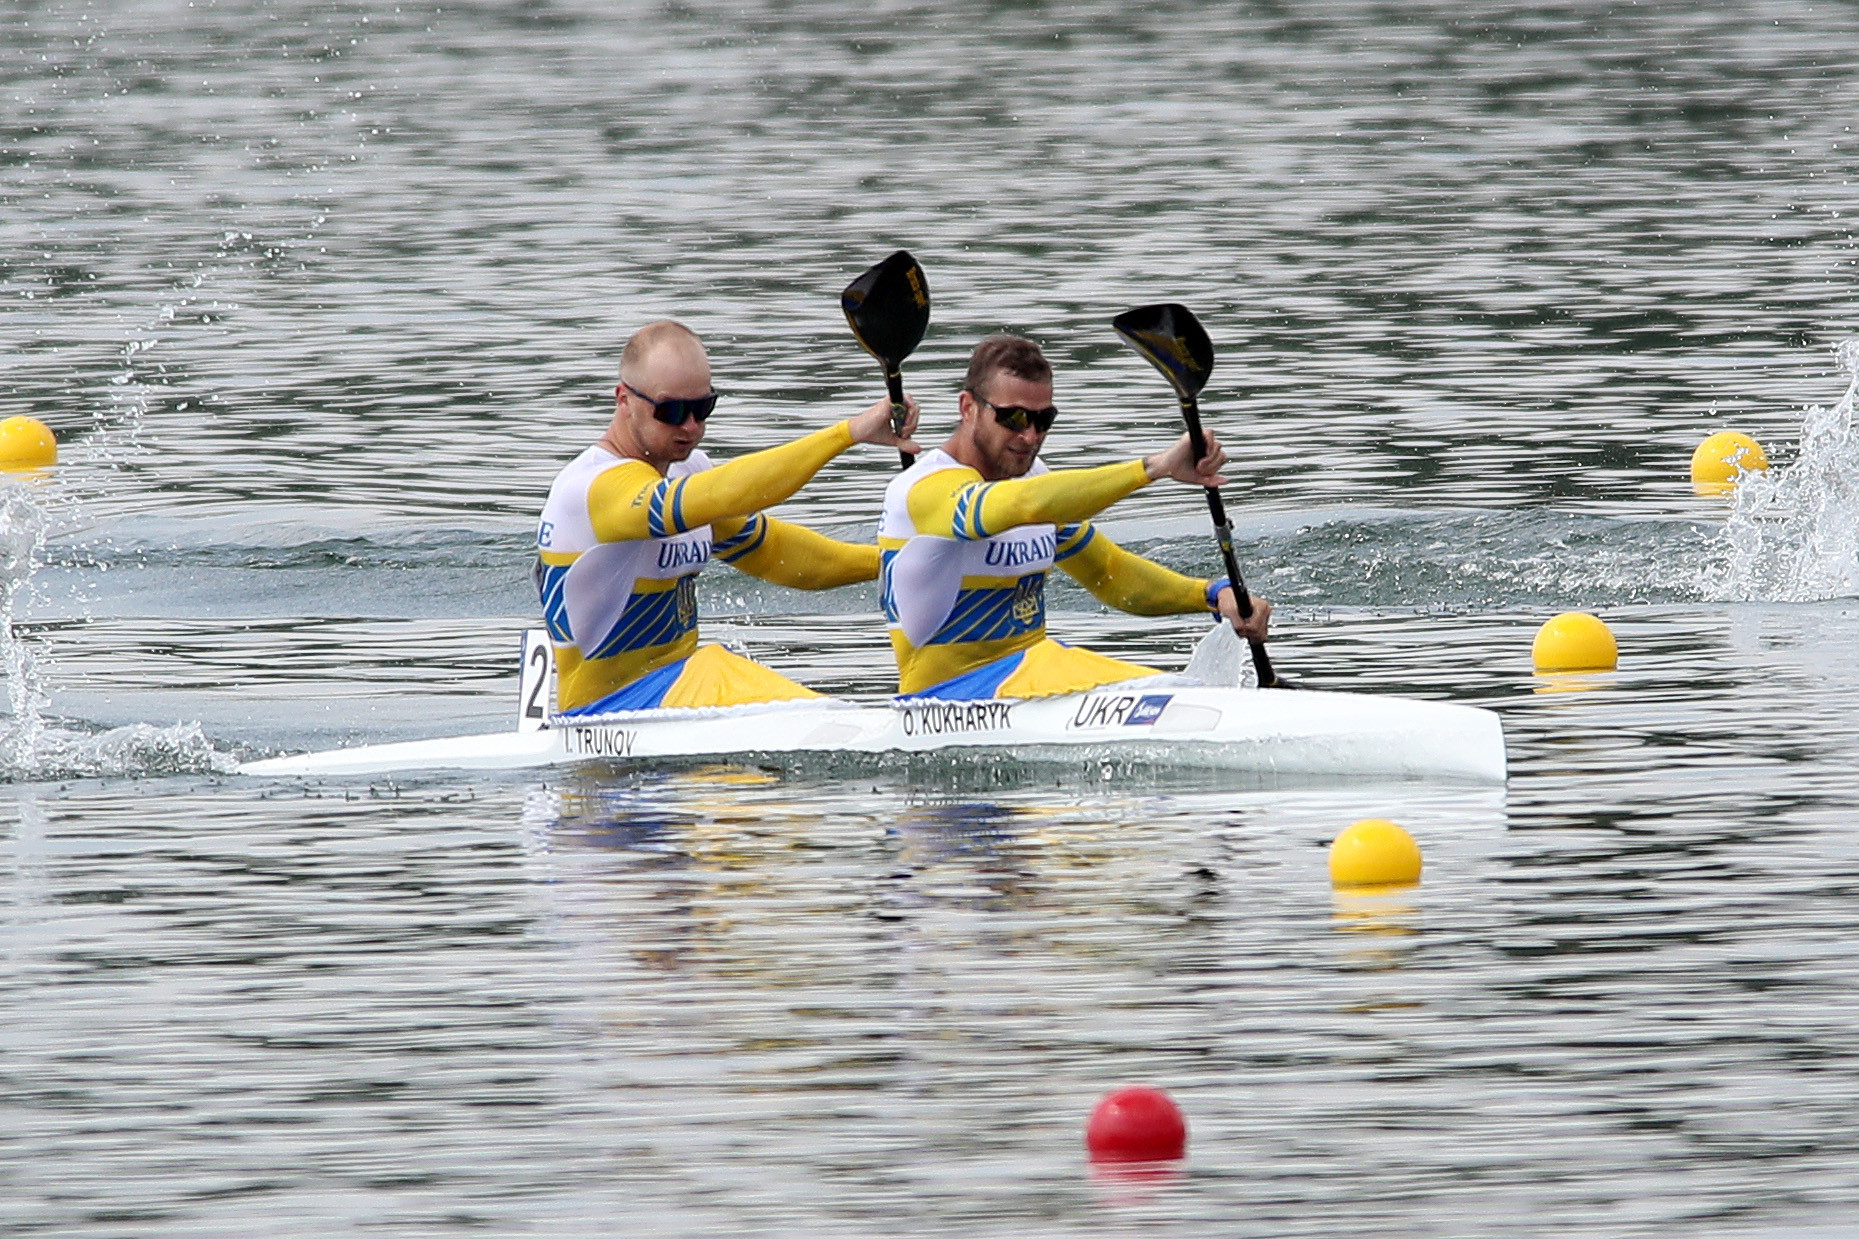 Oleh Kukharyk, right, and Ihor Trunov, left, also earned gold for Ukraine in the canoe sprint men's K2 500m to help their nation top the medals table ©Kraków-Małopolska 2023